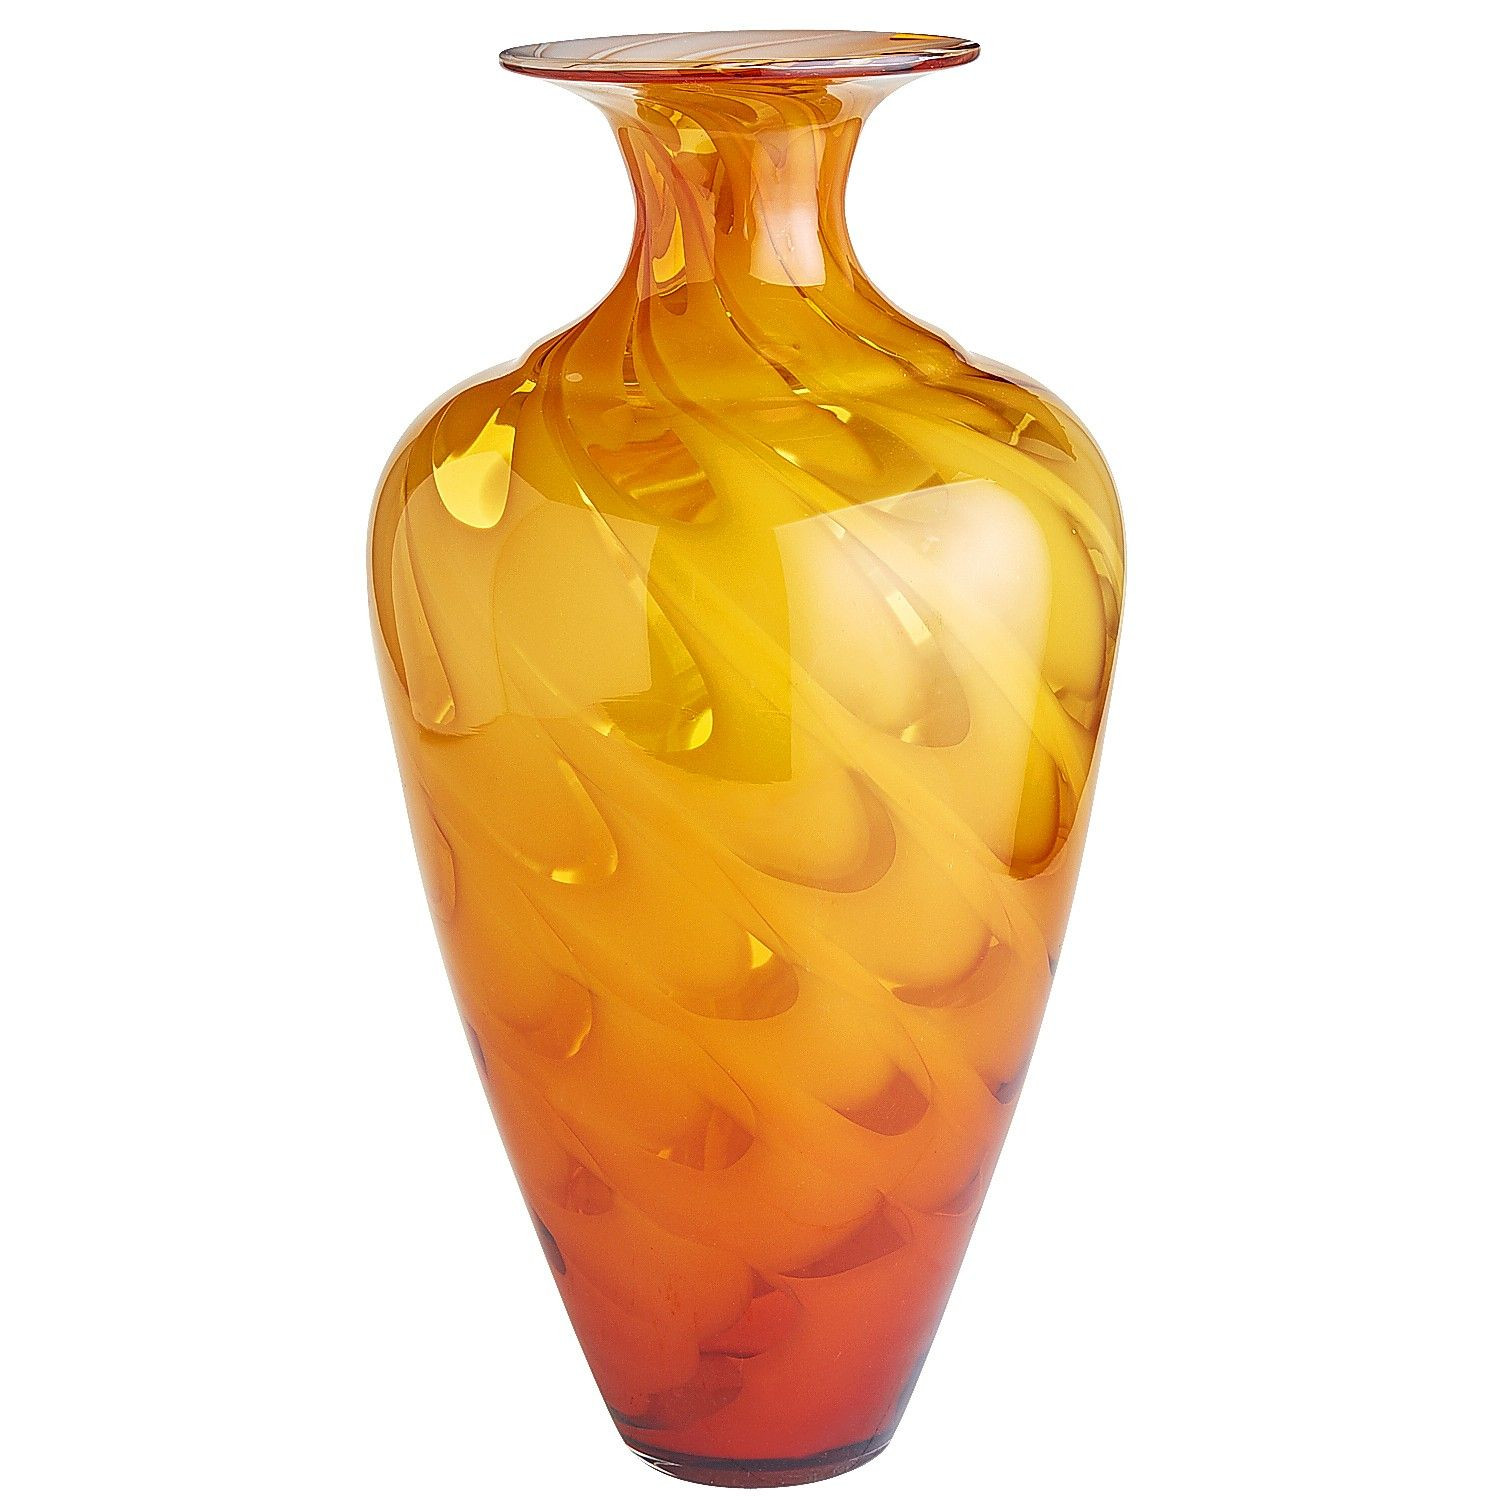 30 Lovable Amber Bubble Glass Vase 2024 free download amber bubble glass vase of art glass swirl tall vase amber home garden decor intended for art glass swirl tall vase amber